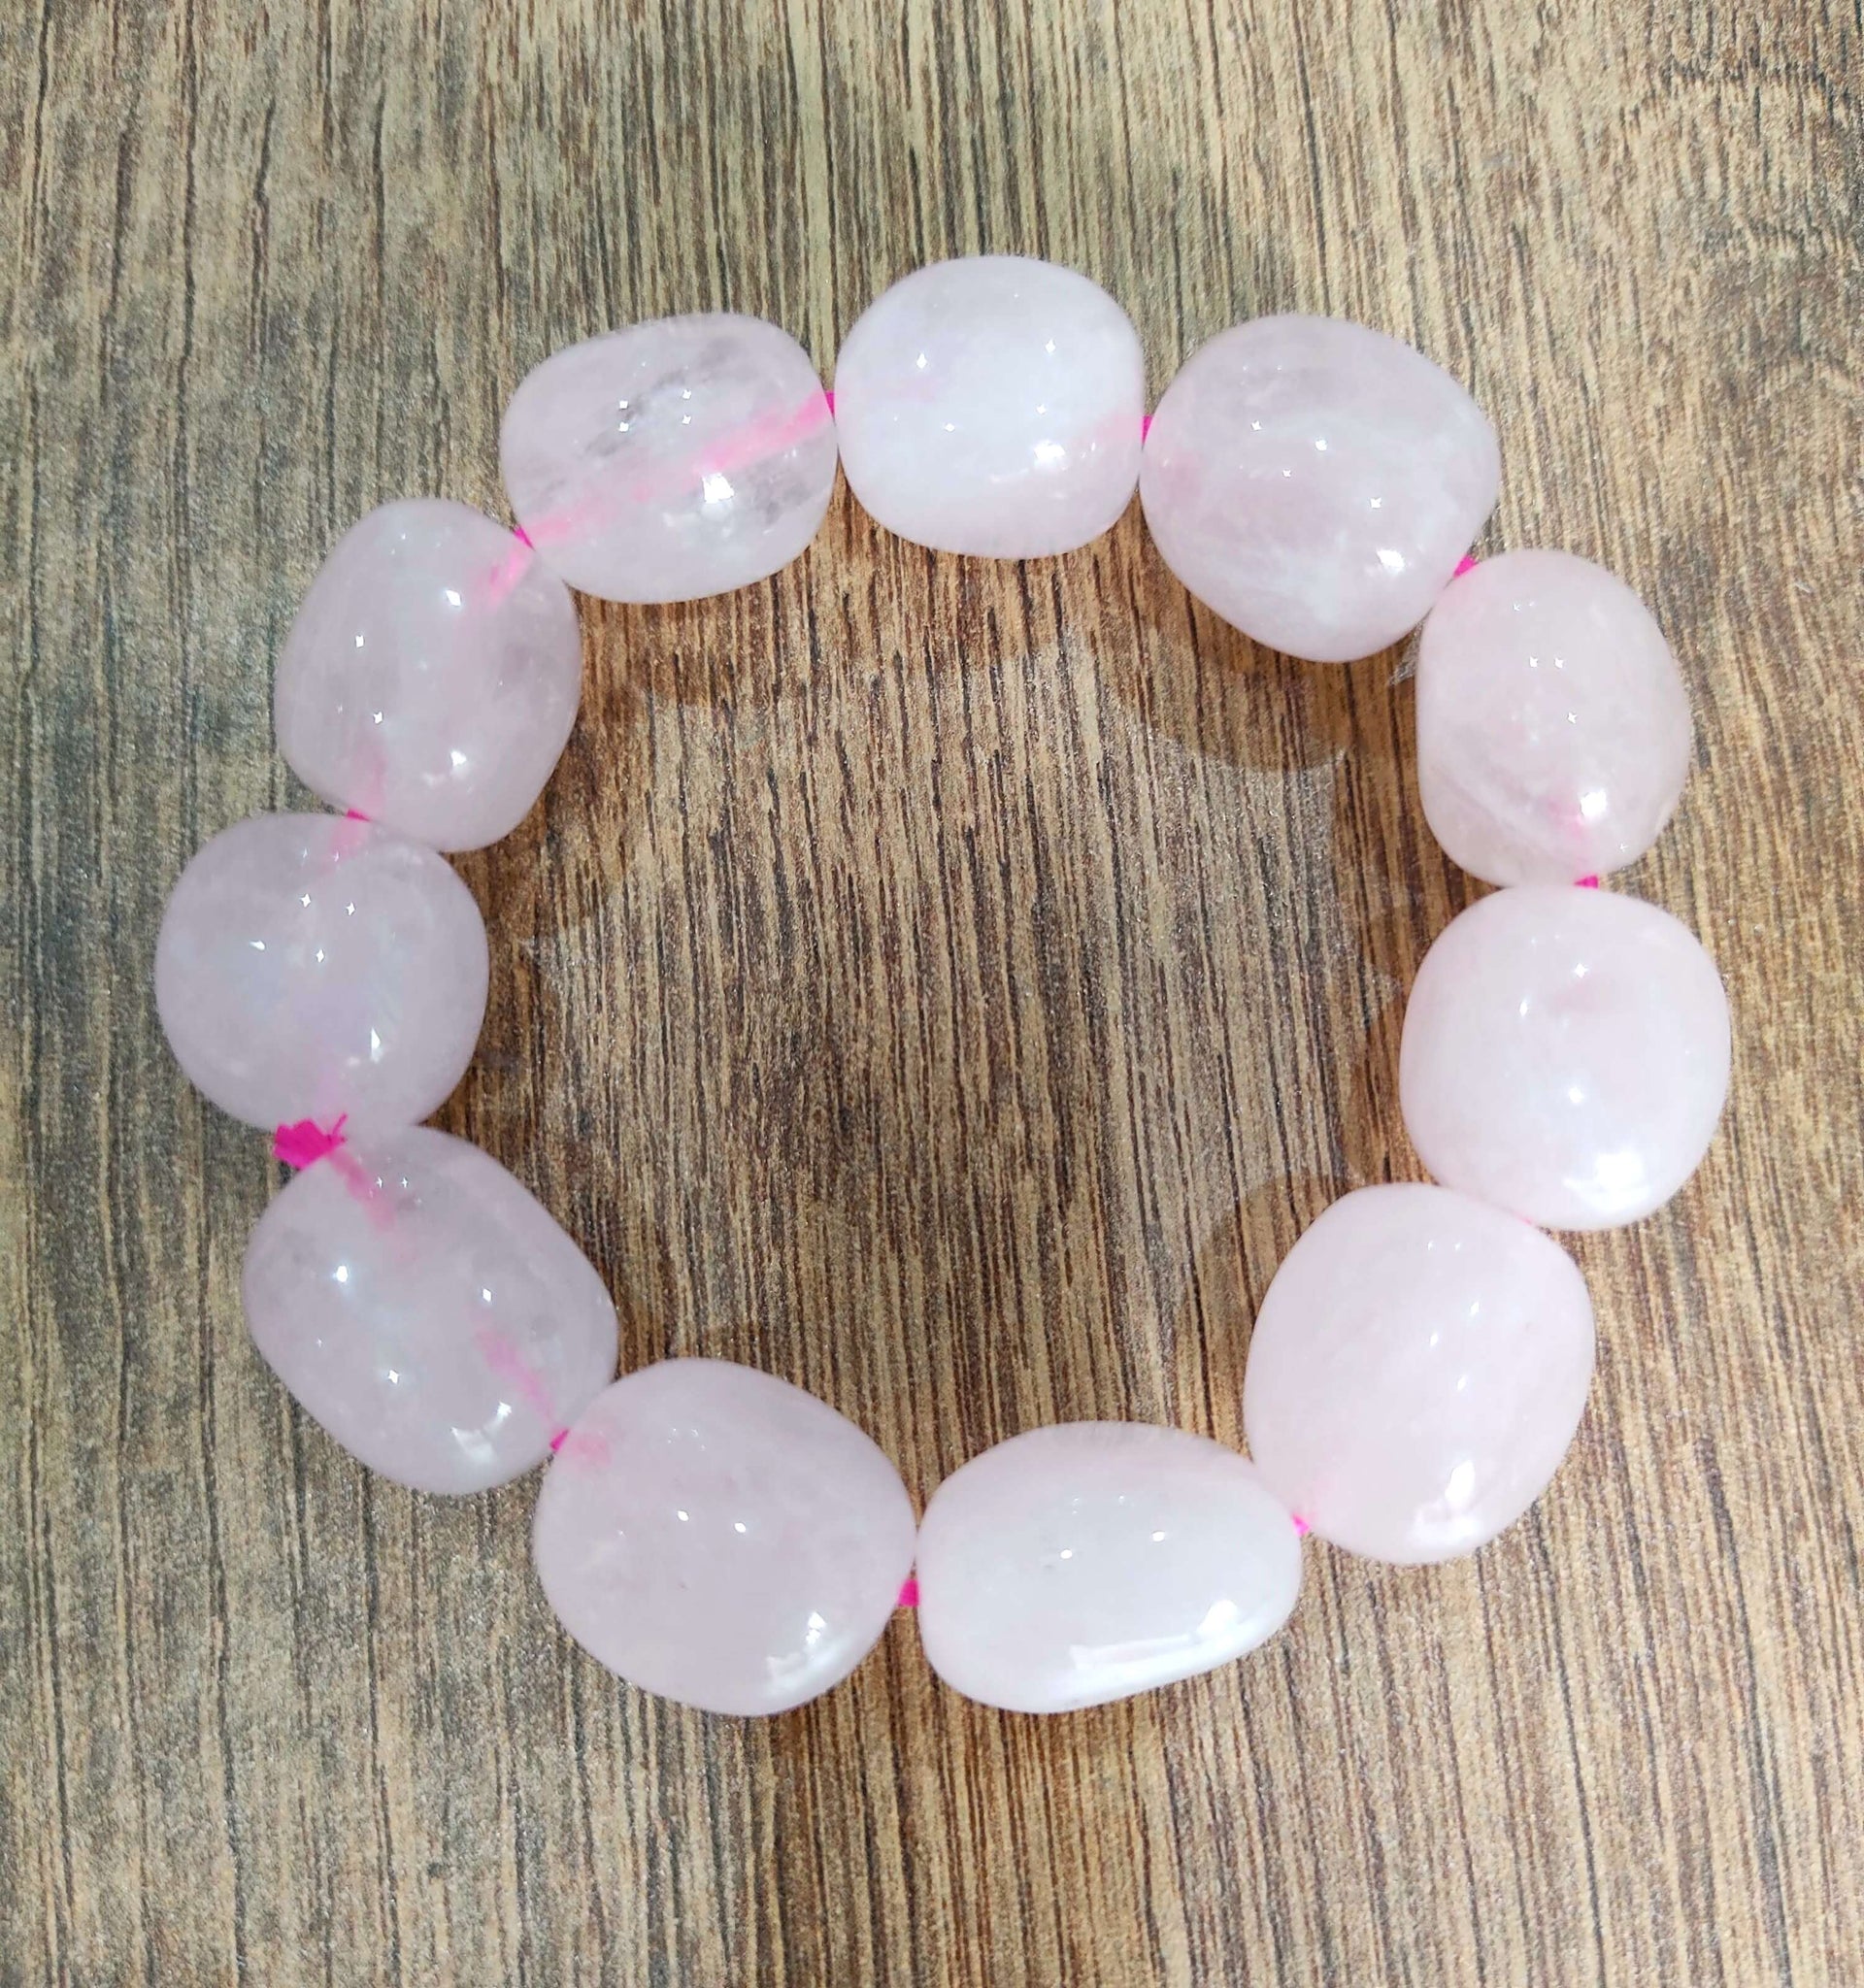 The Meaning, Uses, and Healing Properties of Rose Quartz | Sarah Scoop